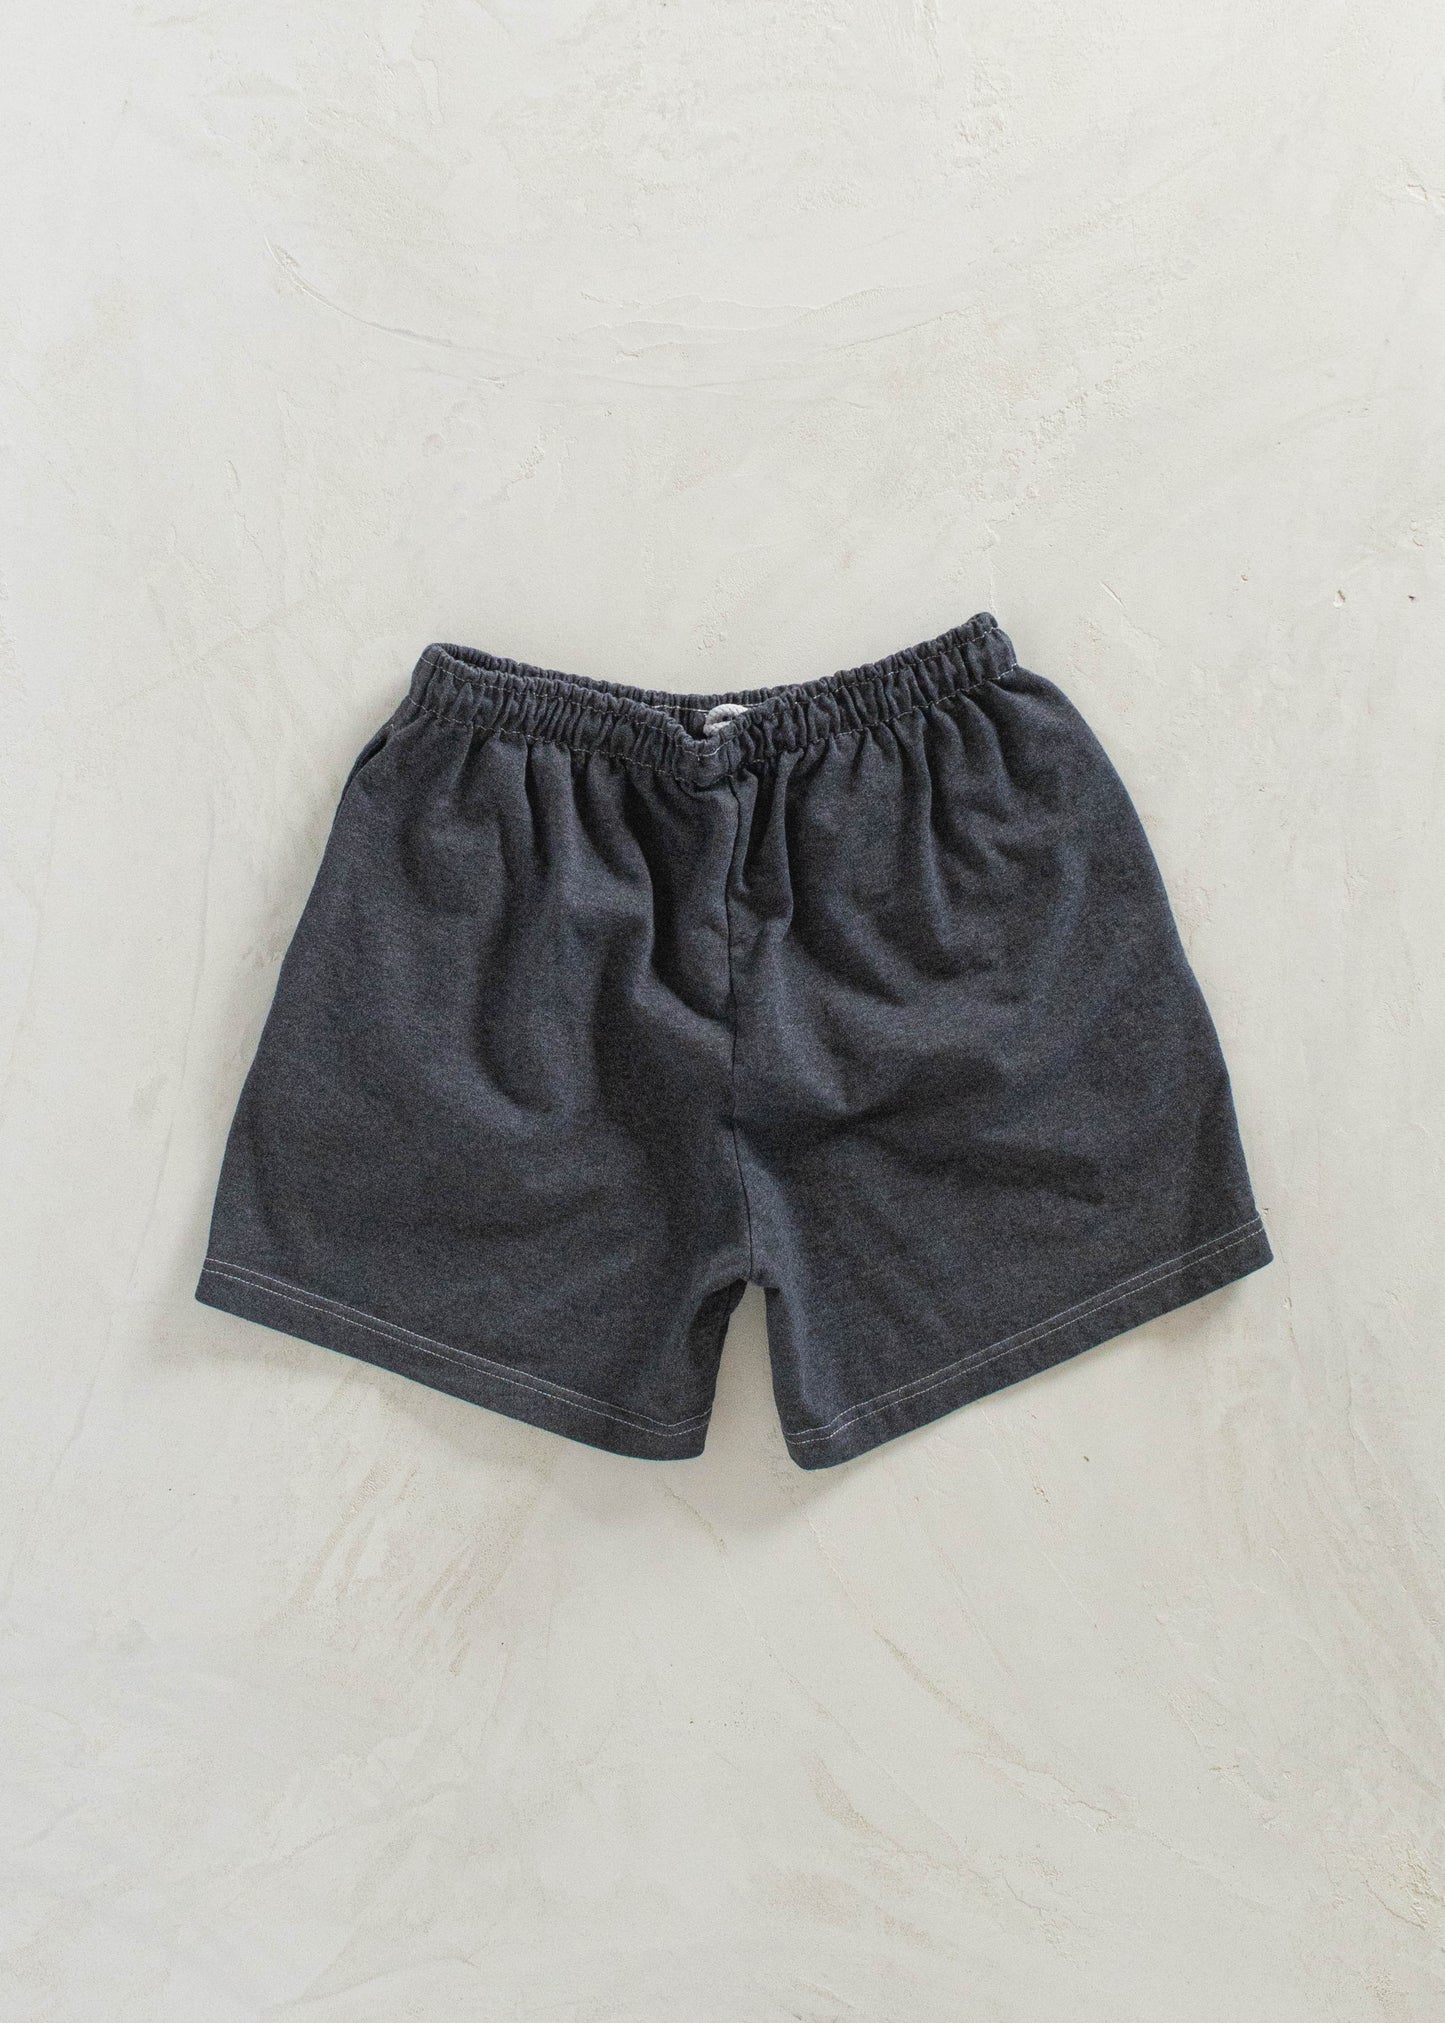 Vintage 1990s Military Overdyed Track Shorts Size XS/S